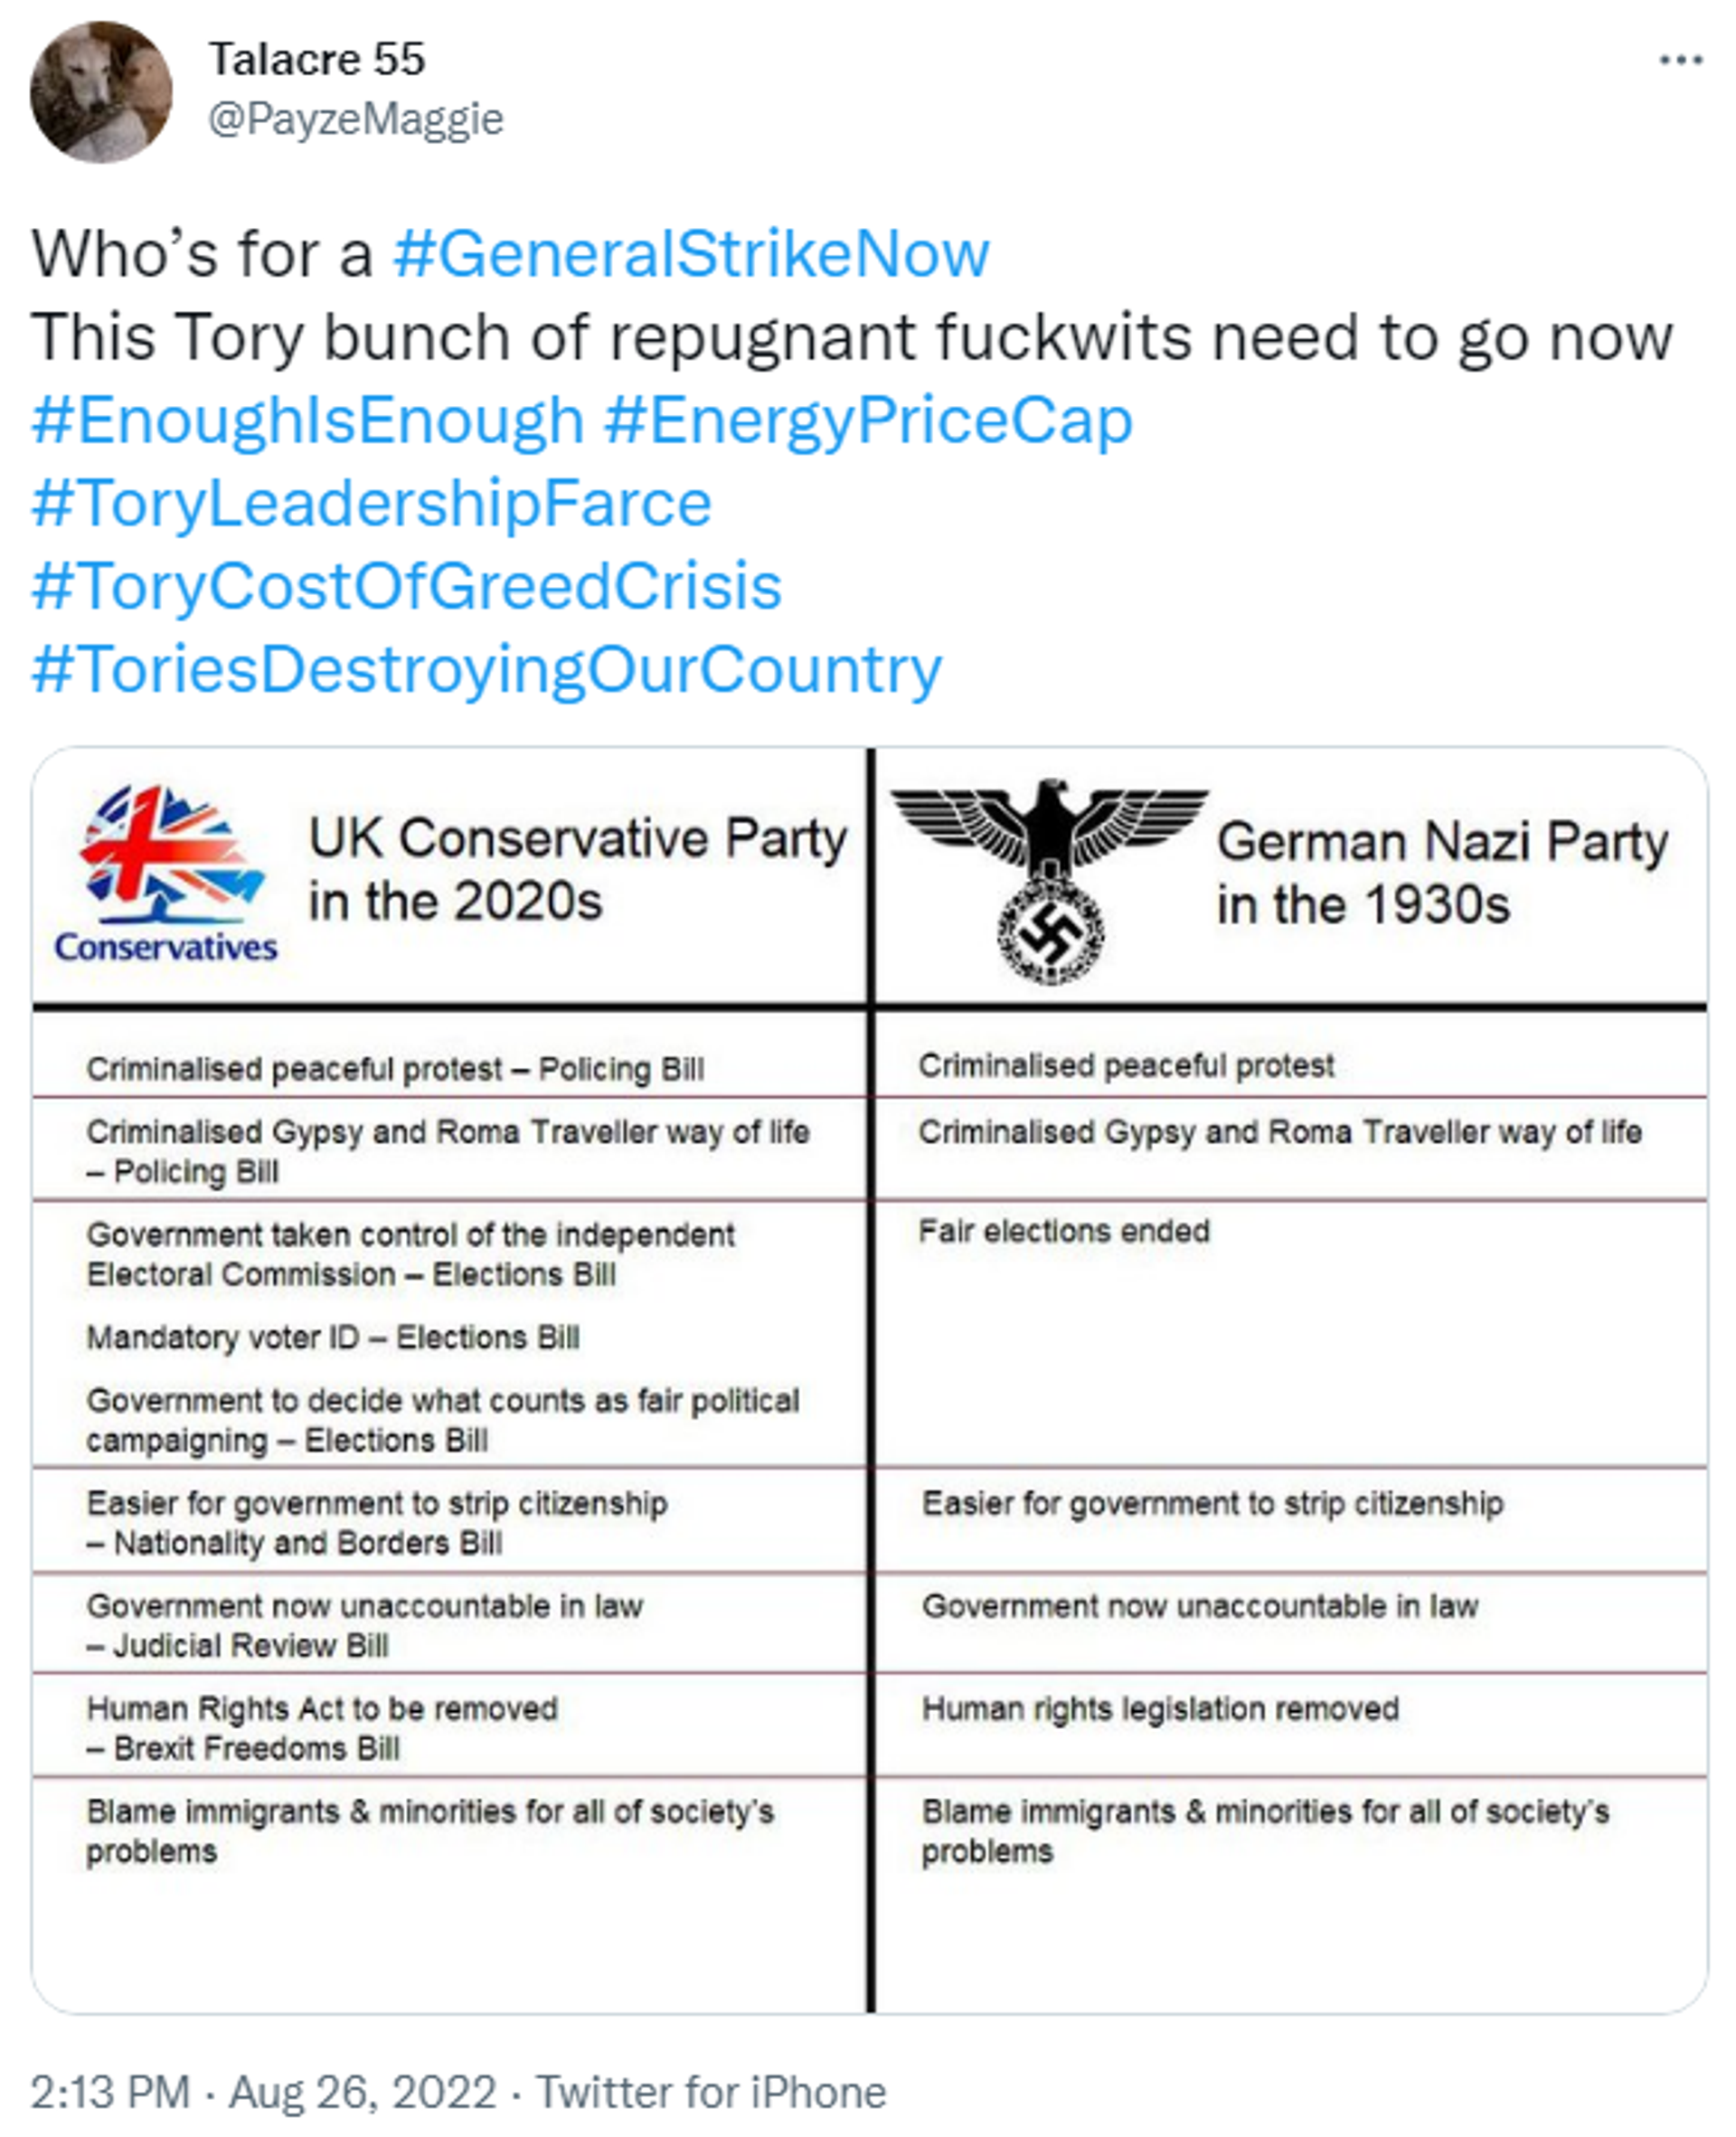 Tweet comparing the British Conservative Party government of 2020 to Nazi Germany - Sputnik International, 1920, 26.08.2022